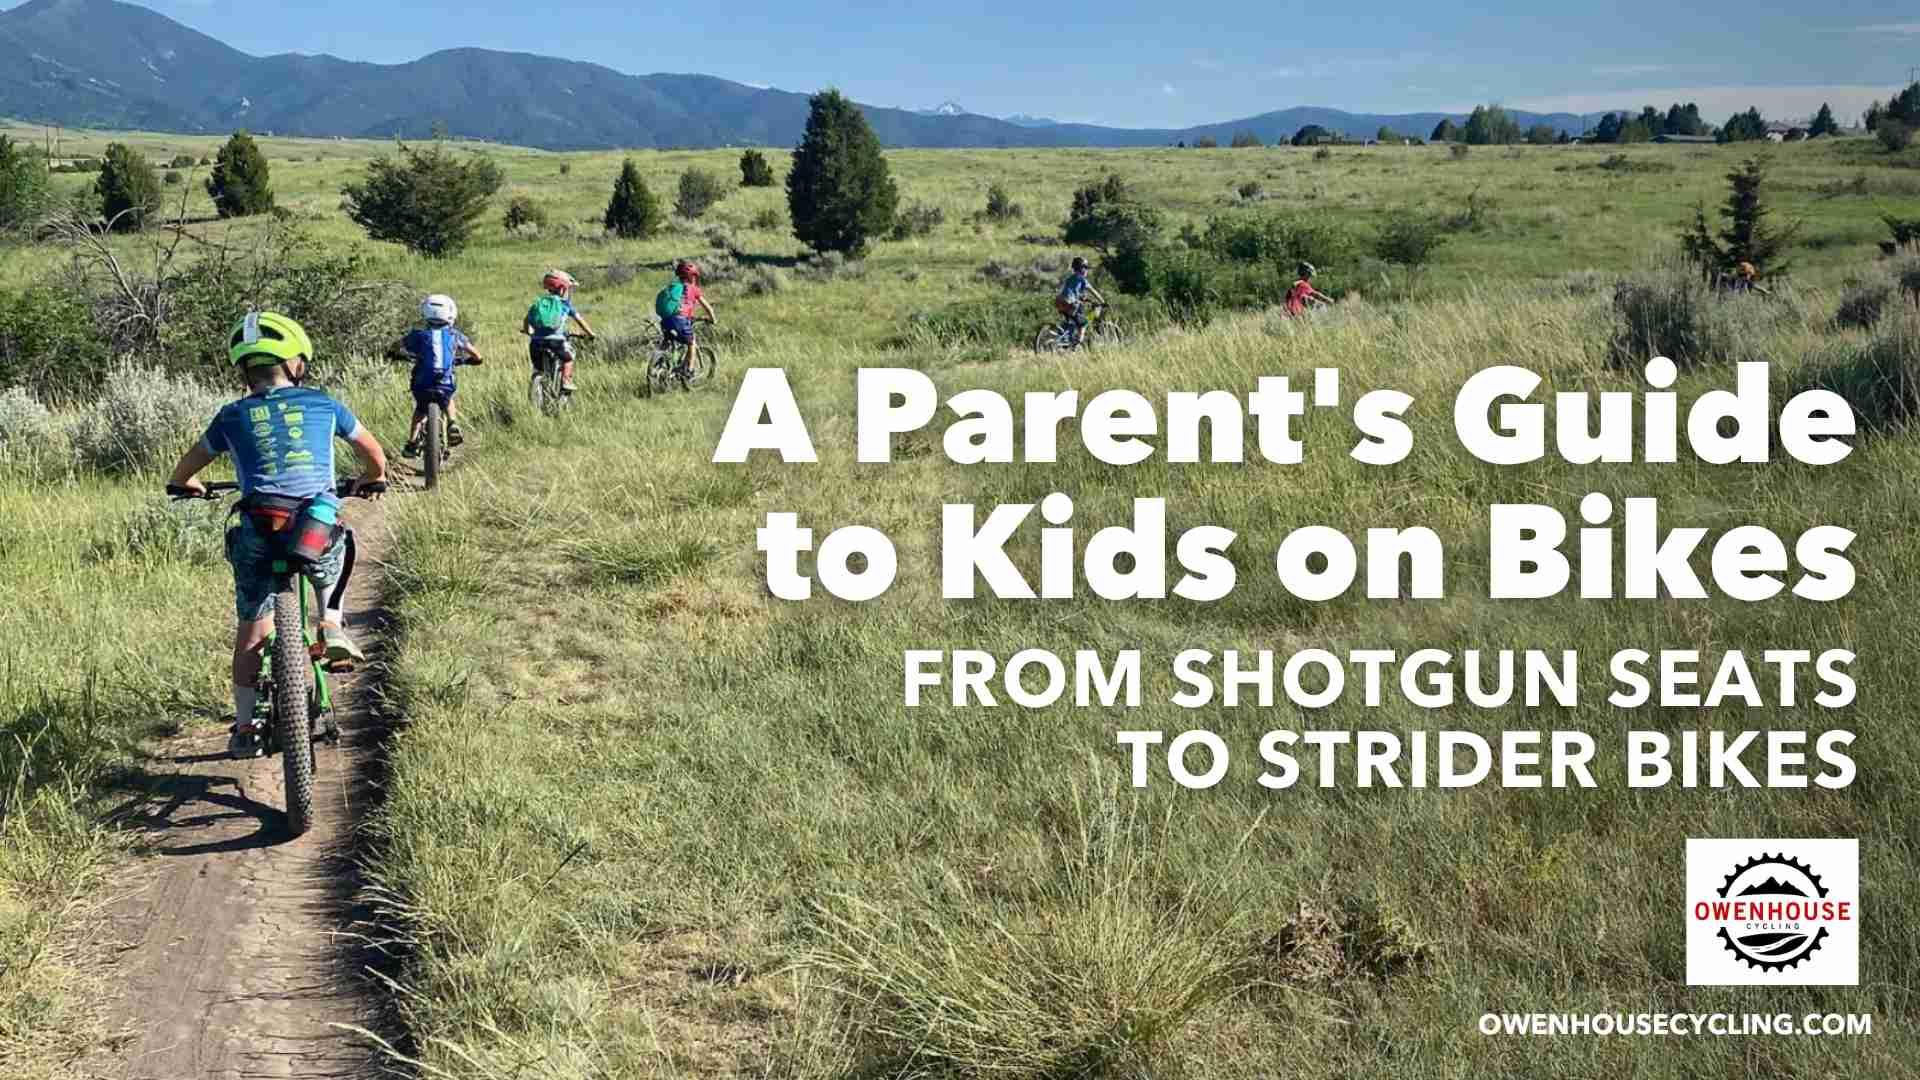 Parent's Guide to Kids on Bikes with kids riding the trails in Bozeman, Montana